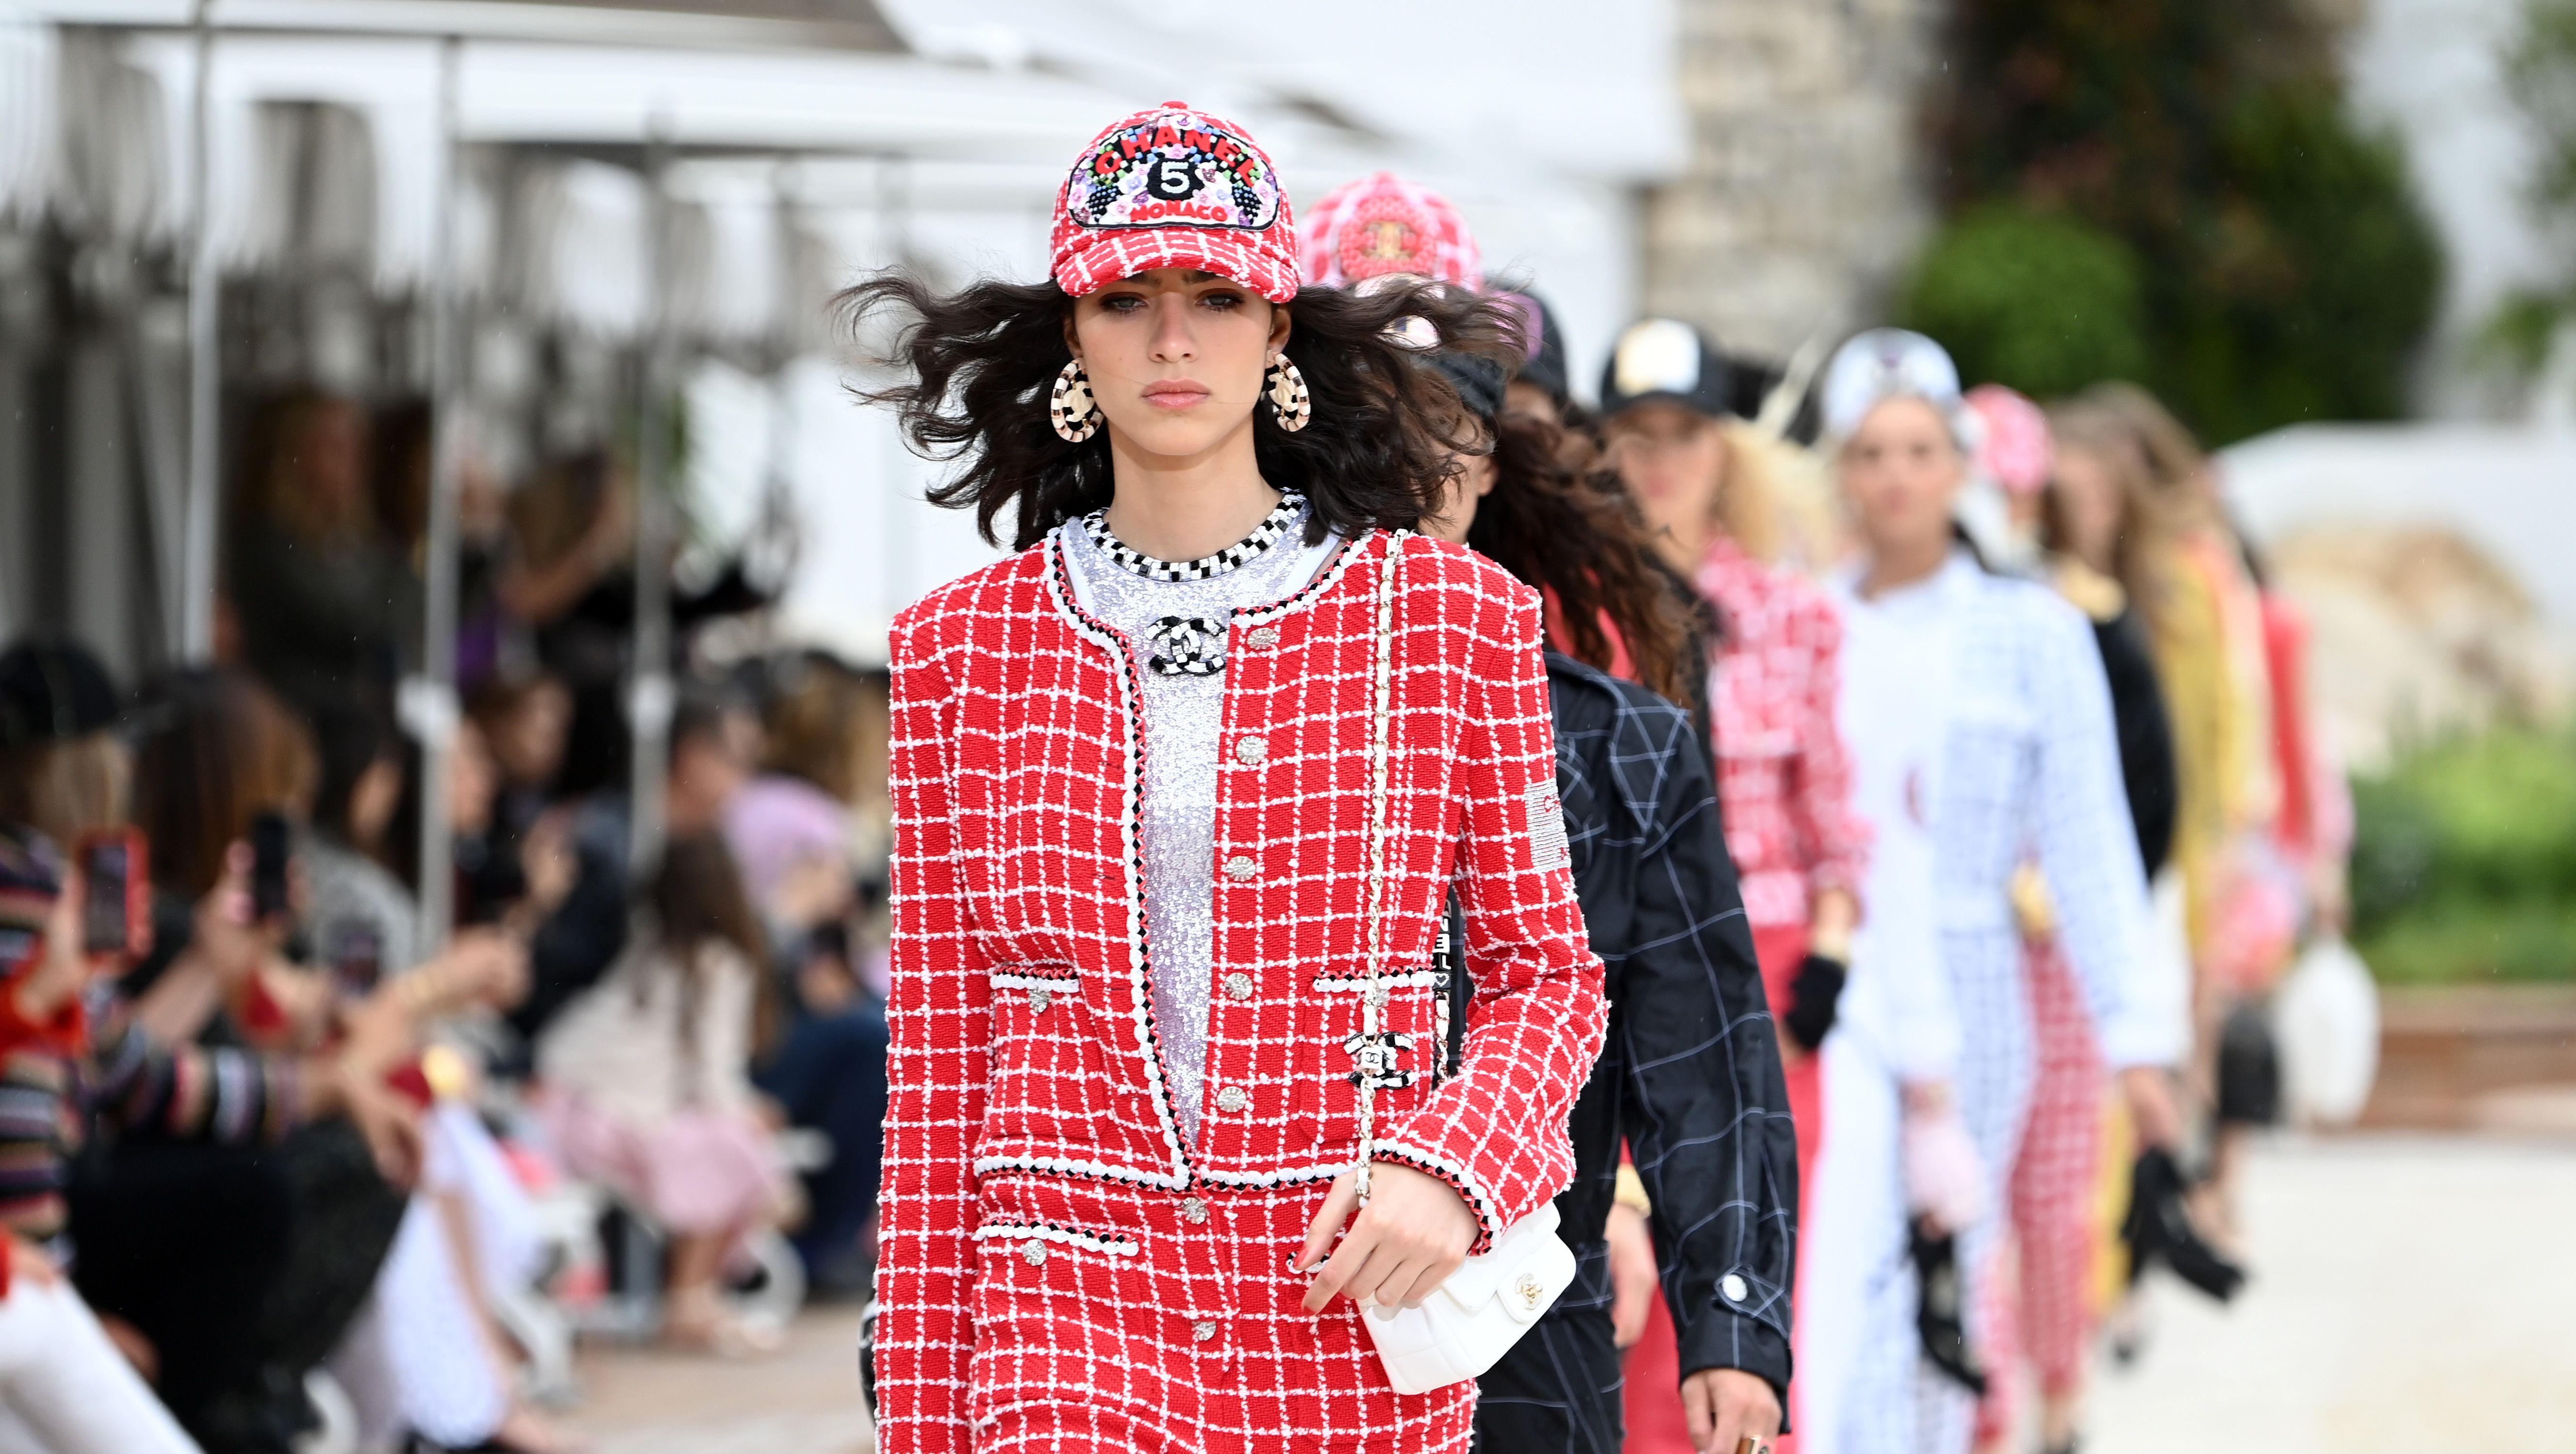 Chanel stages fashion show in Cuba - BBC News